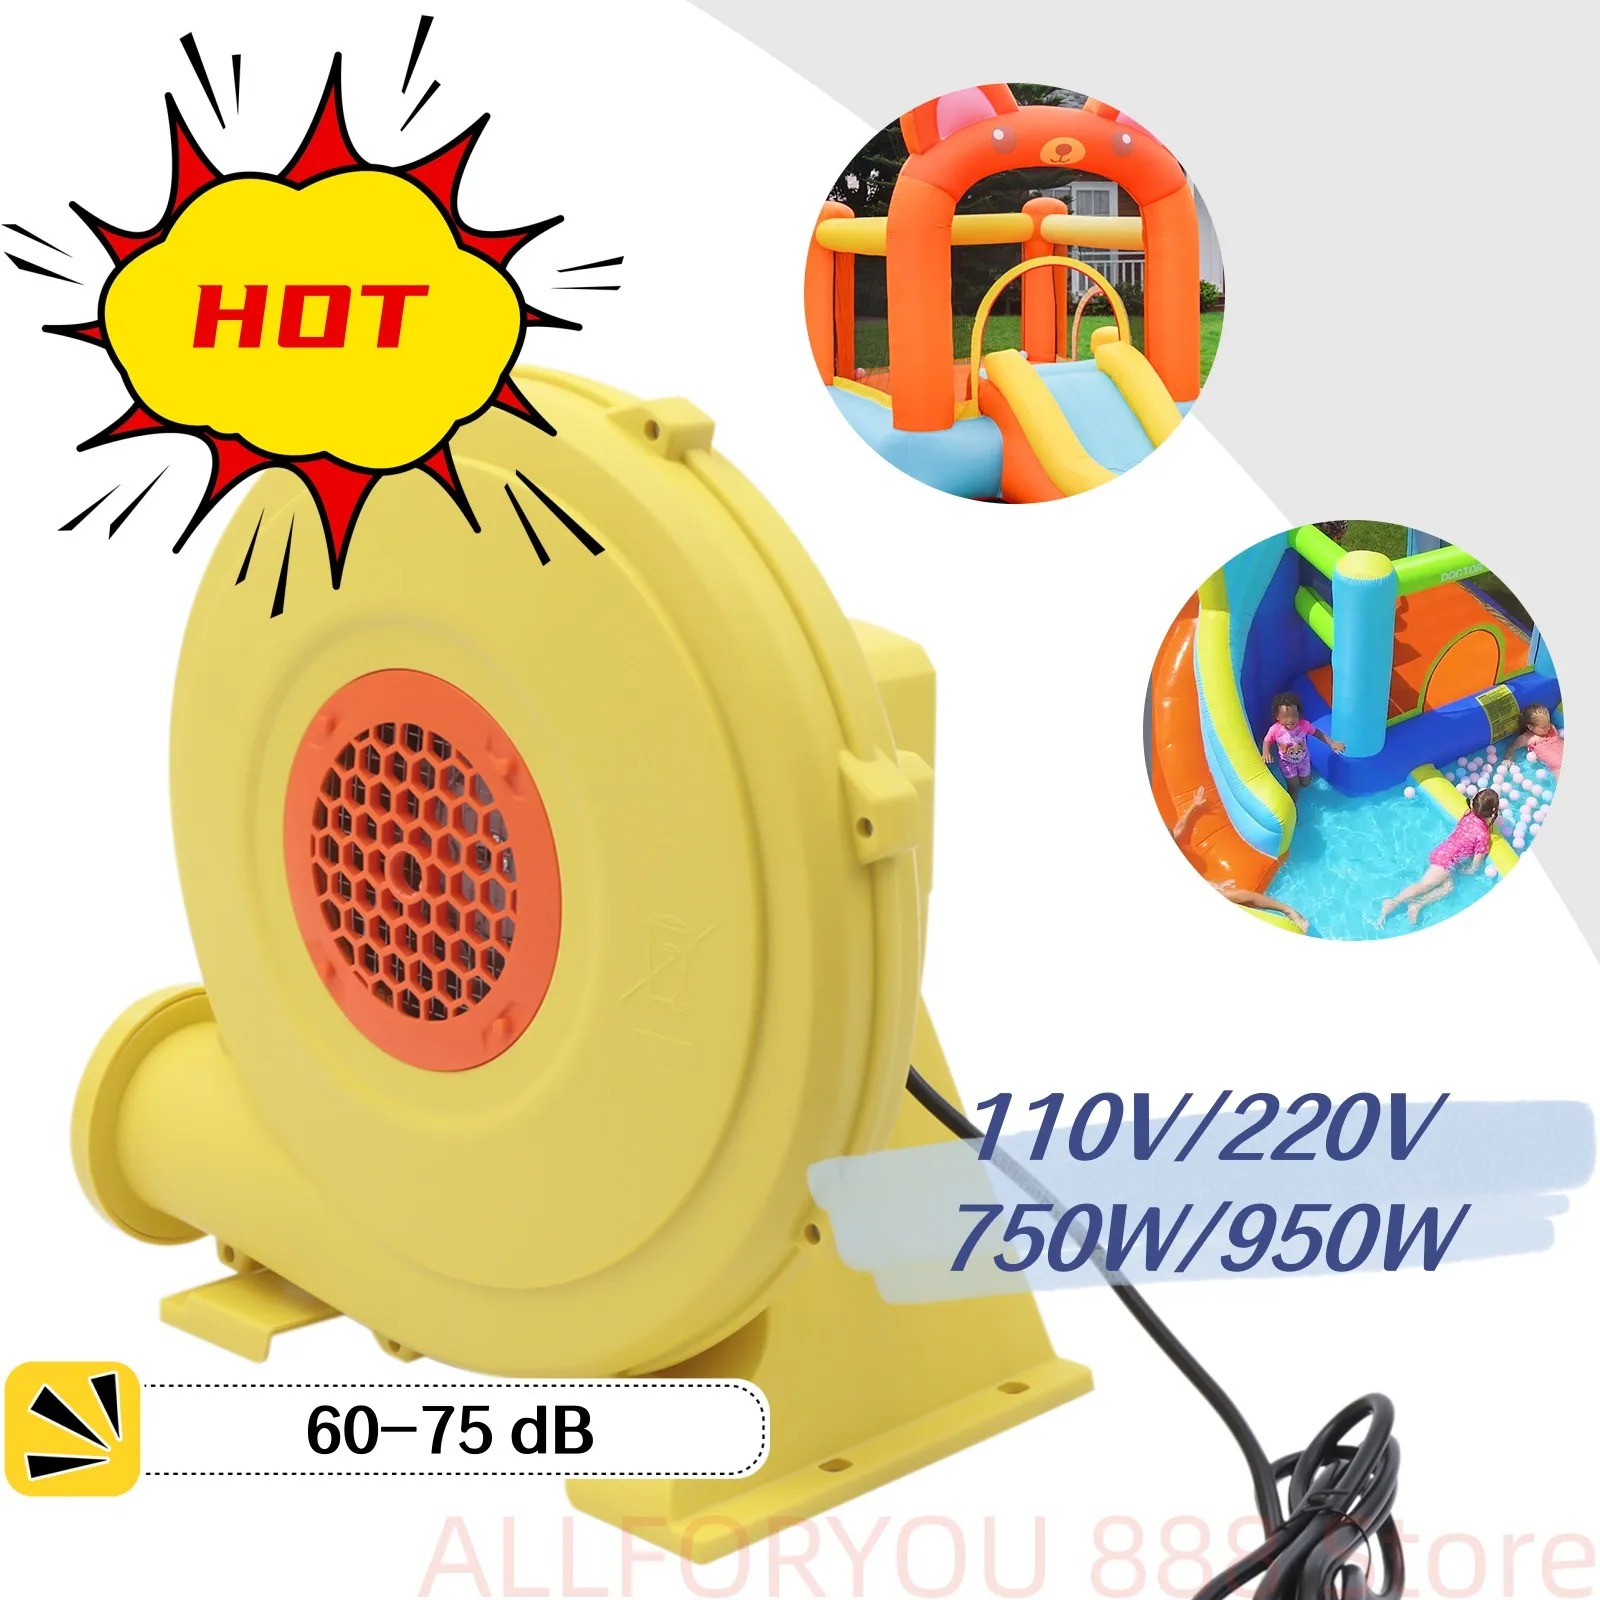 750W/950W Air Blower Commercial Inflatable Fan Bounce Fan For Bouncy Castle 110V/220V top 5m diame r inflatable wa r trampoline bounce swim platform lake toy ch